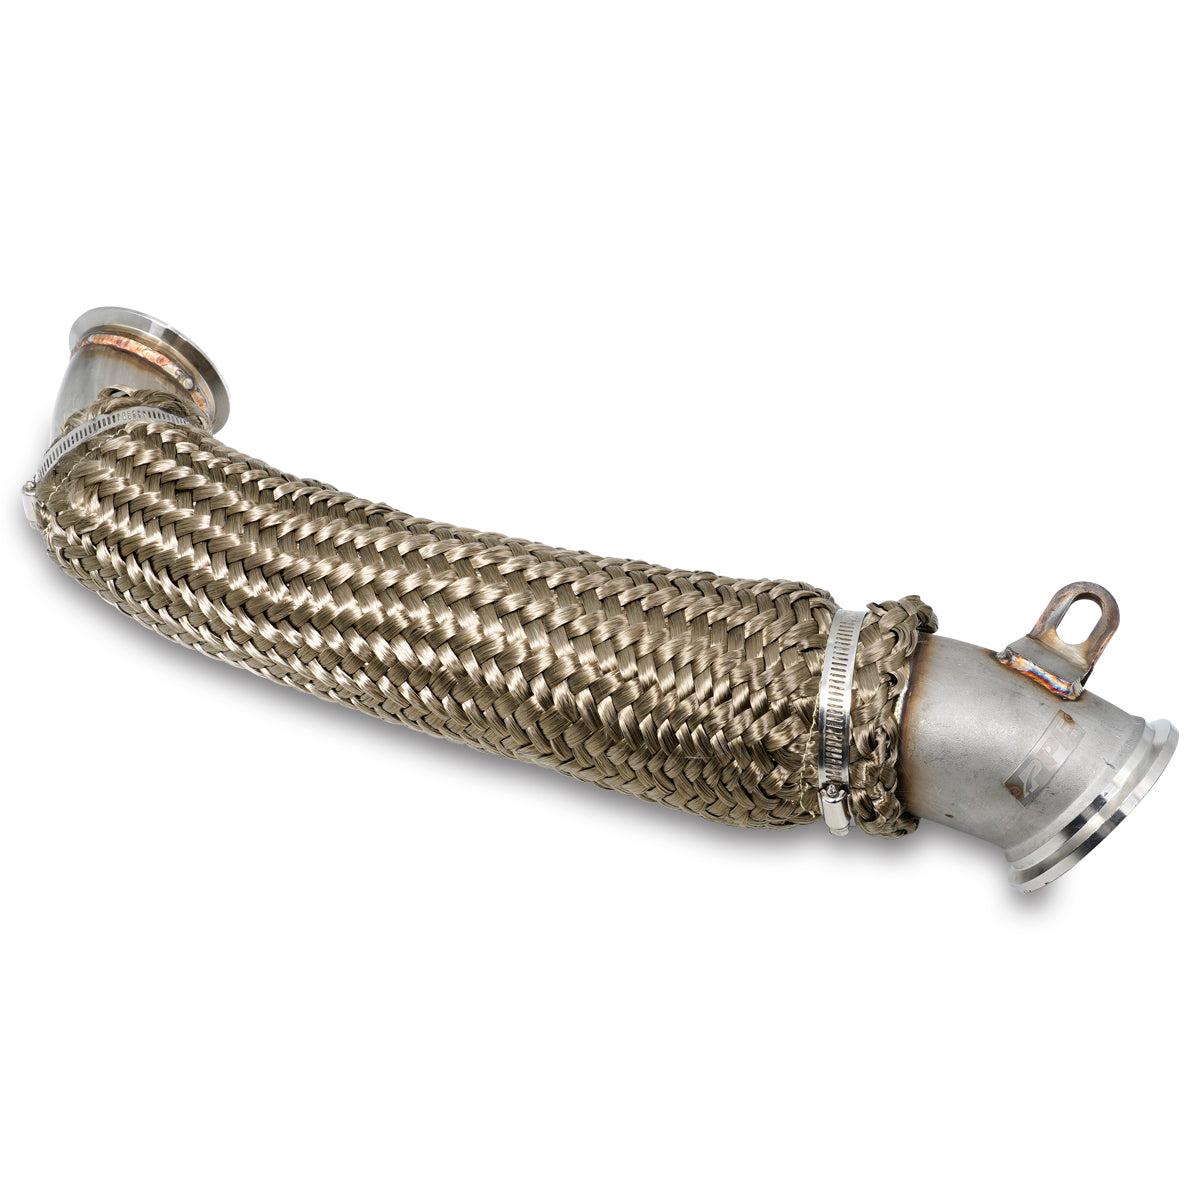 Three-Inch 304 Stainless Steel Down Pipe 40 Series Standard Length For Use With No Riser Block